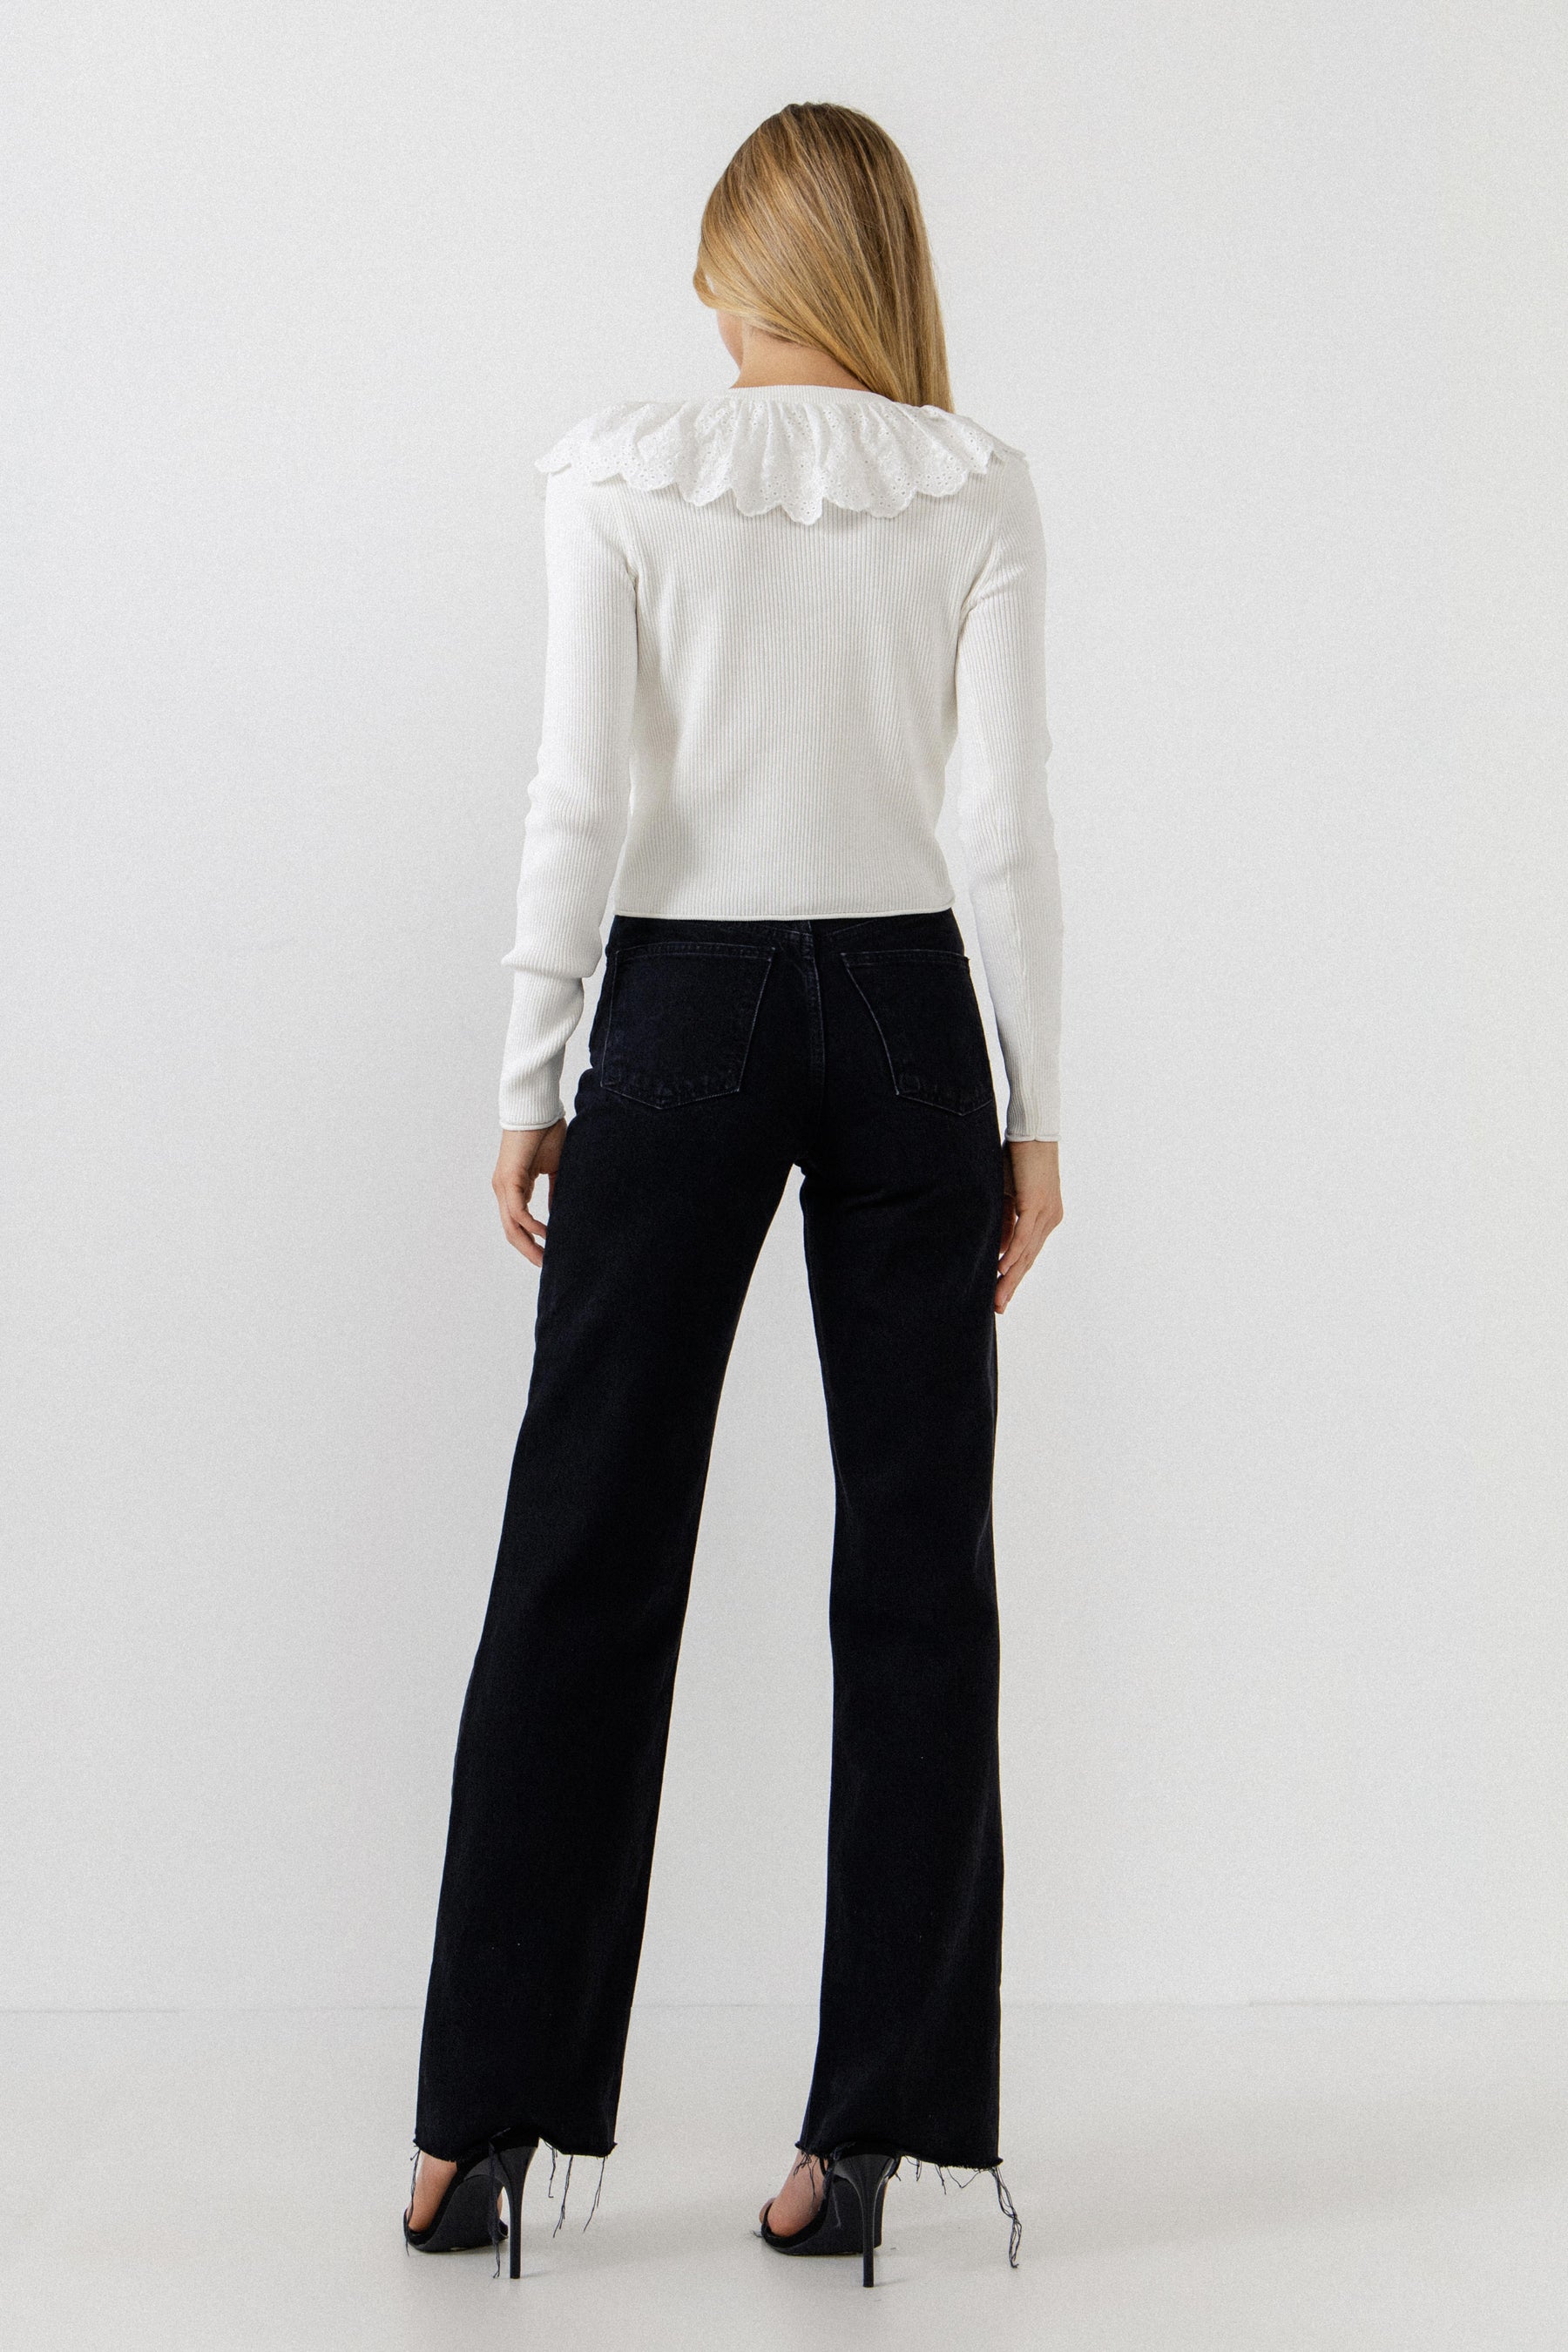 ENGLISH FACTORY - Eyelet Ruffle with Knit Cardigan - TOPS available at Objectrare